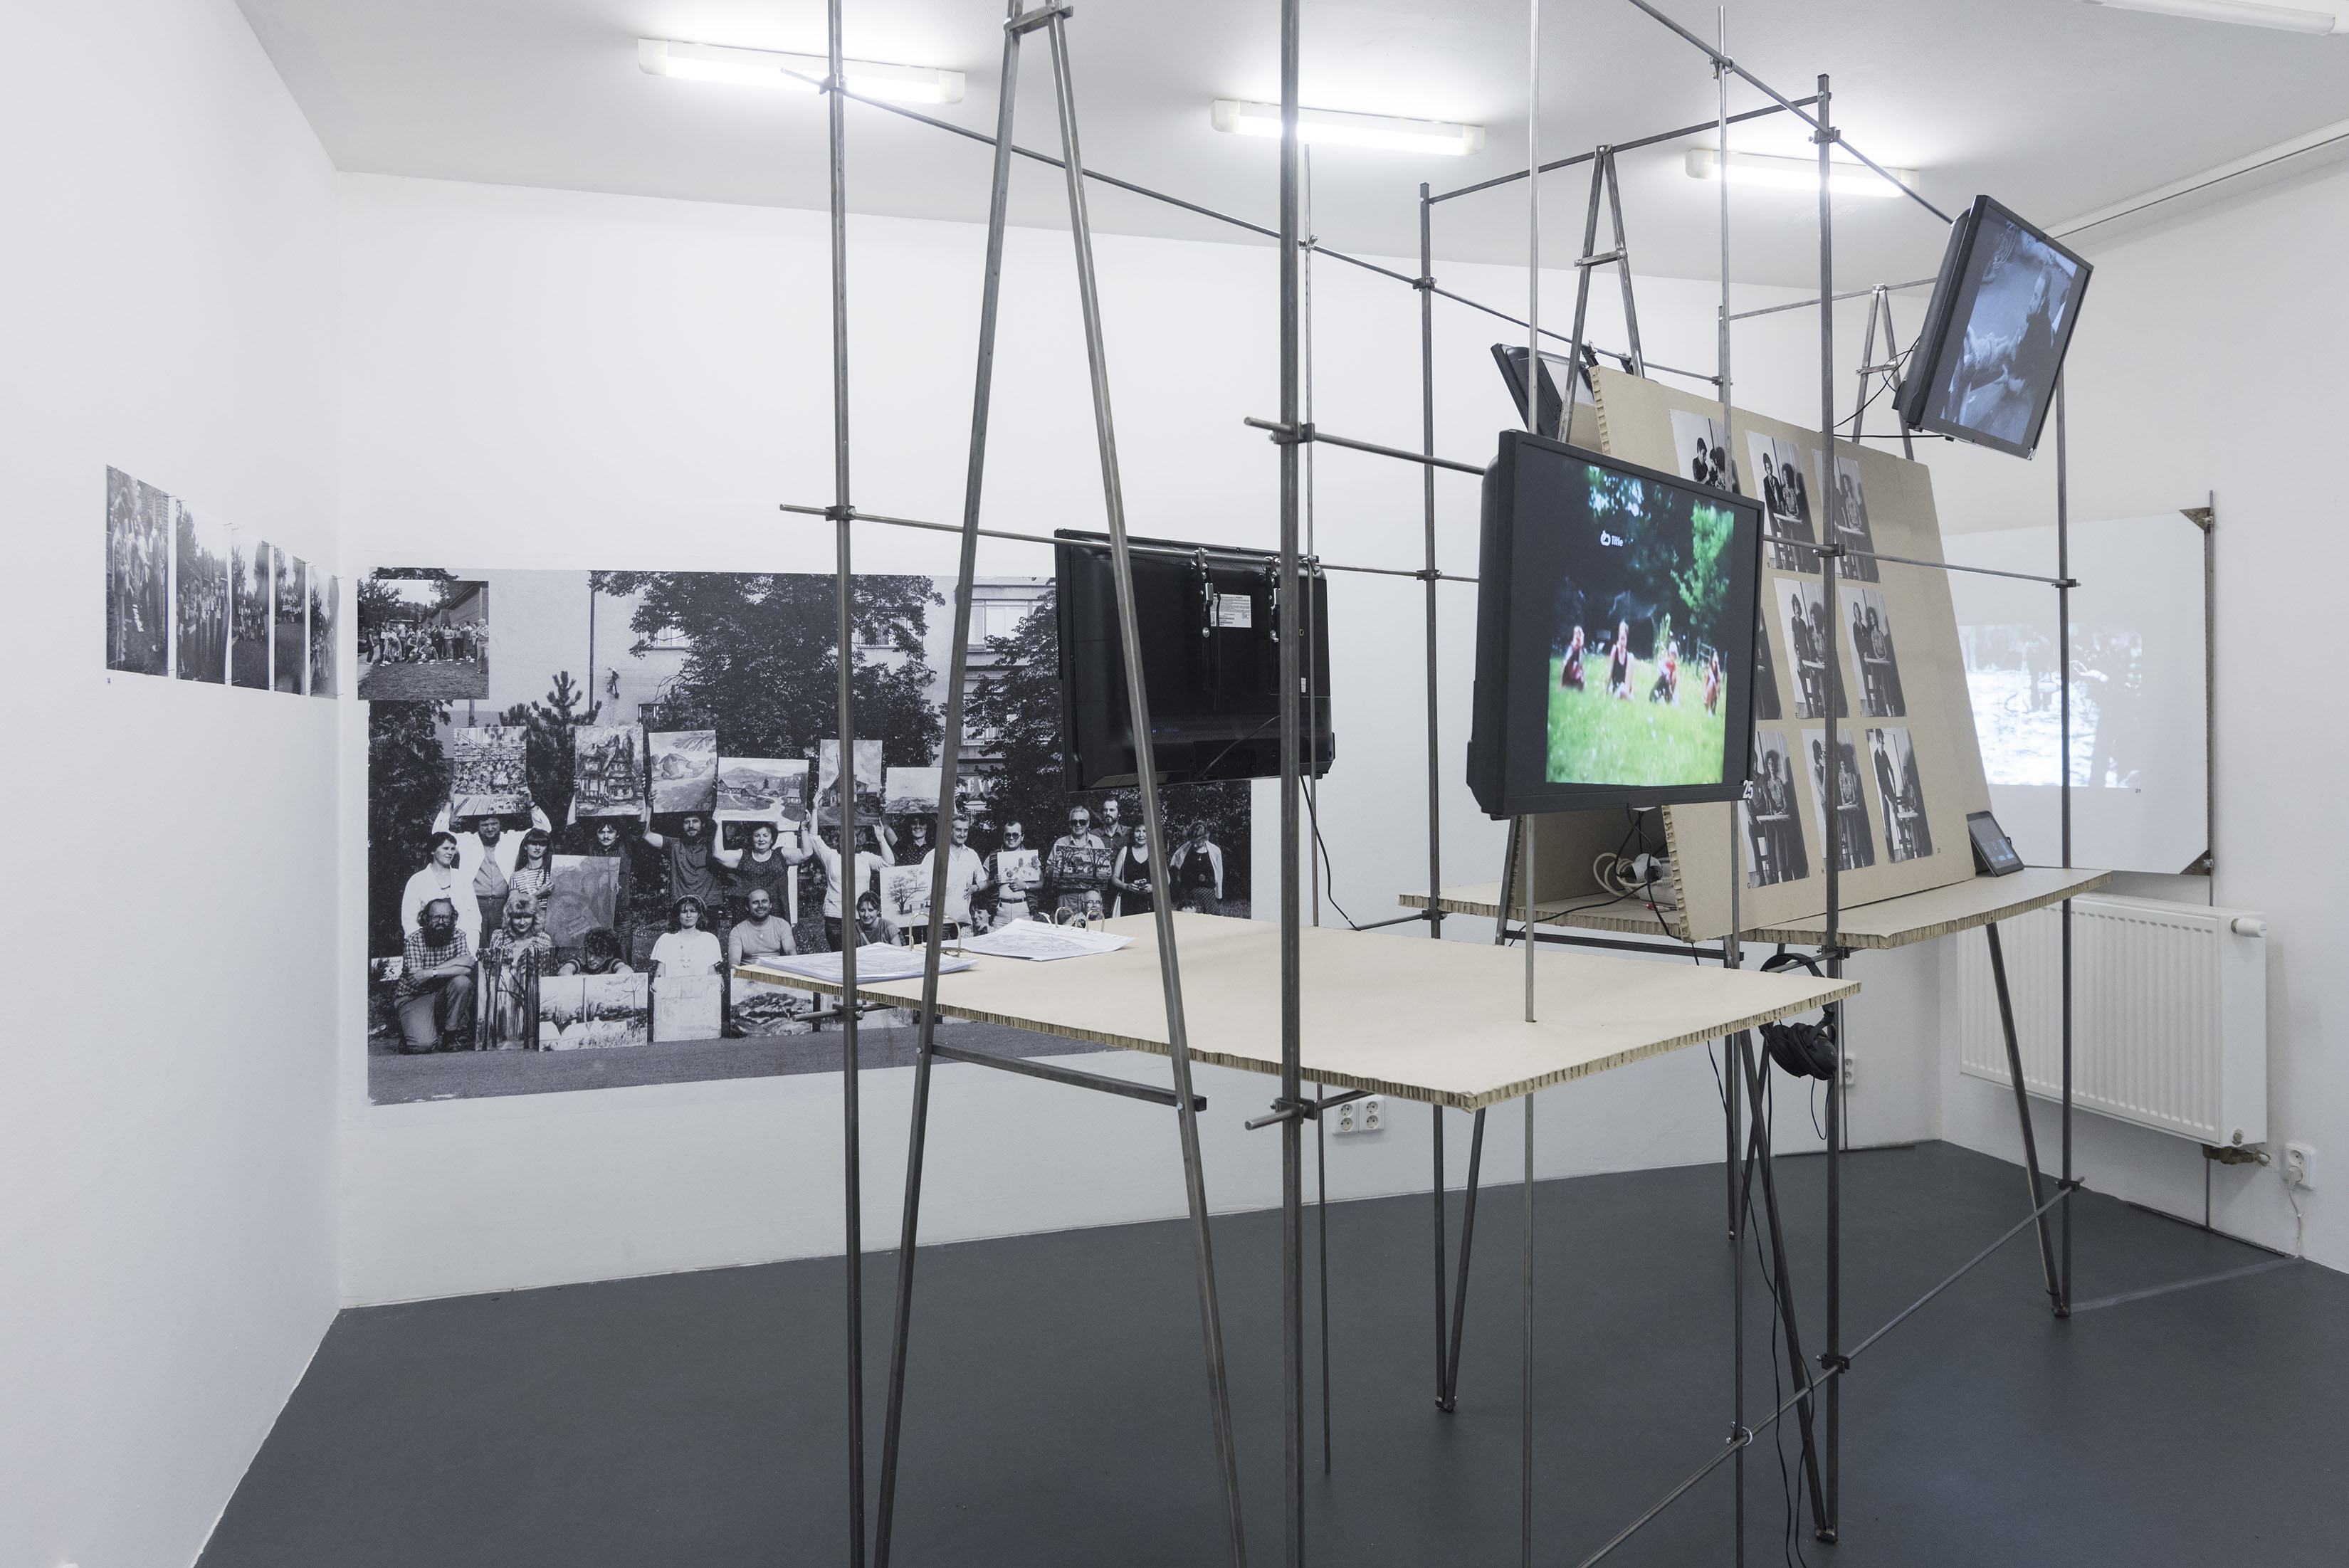 Exhibition view, From People’s Education to the Democratization of Art. The Neo-avant-garde Artist as Educator of [the] People. Image courtesy of tranzit.sk. Photo: Adam Šakový.